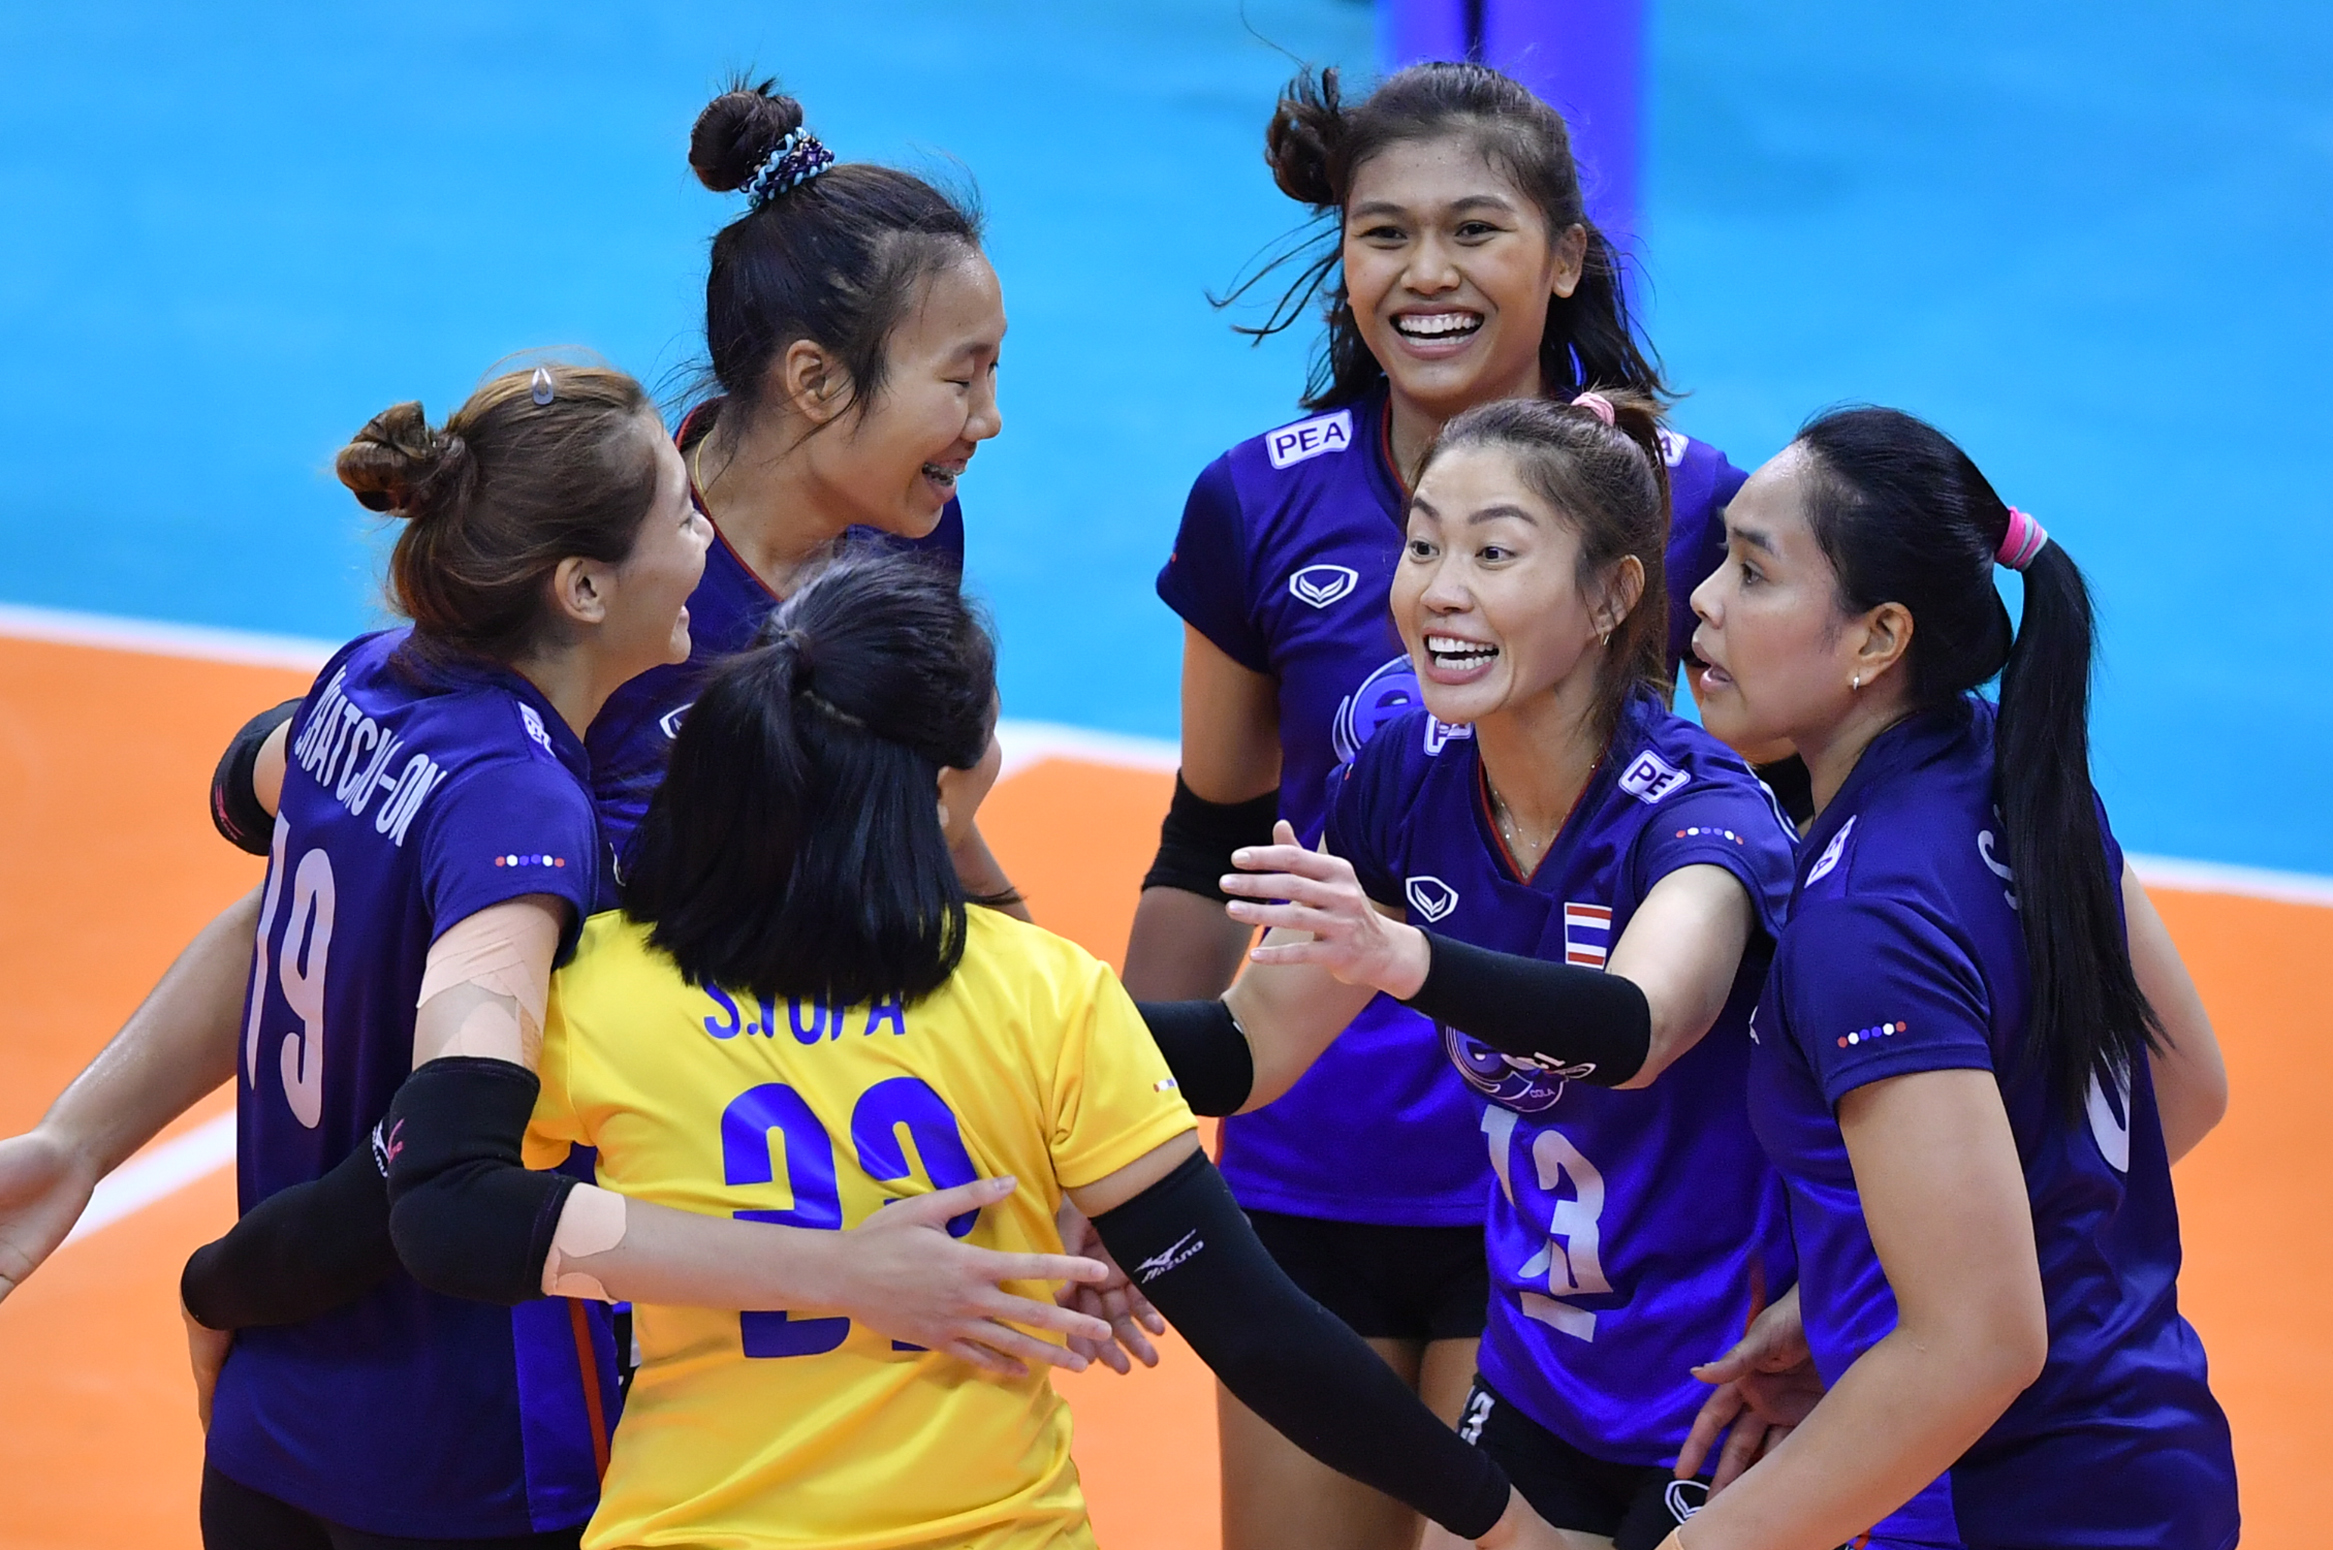 THAILAND EDGE PAST KAZAKHSTAN TO SET UP FINAL CLASH WITH KOREA AT AVC WOMEN’S TOKYO VOLLEYBALL QUALIFICATION